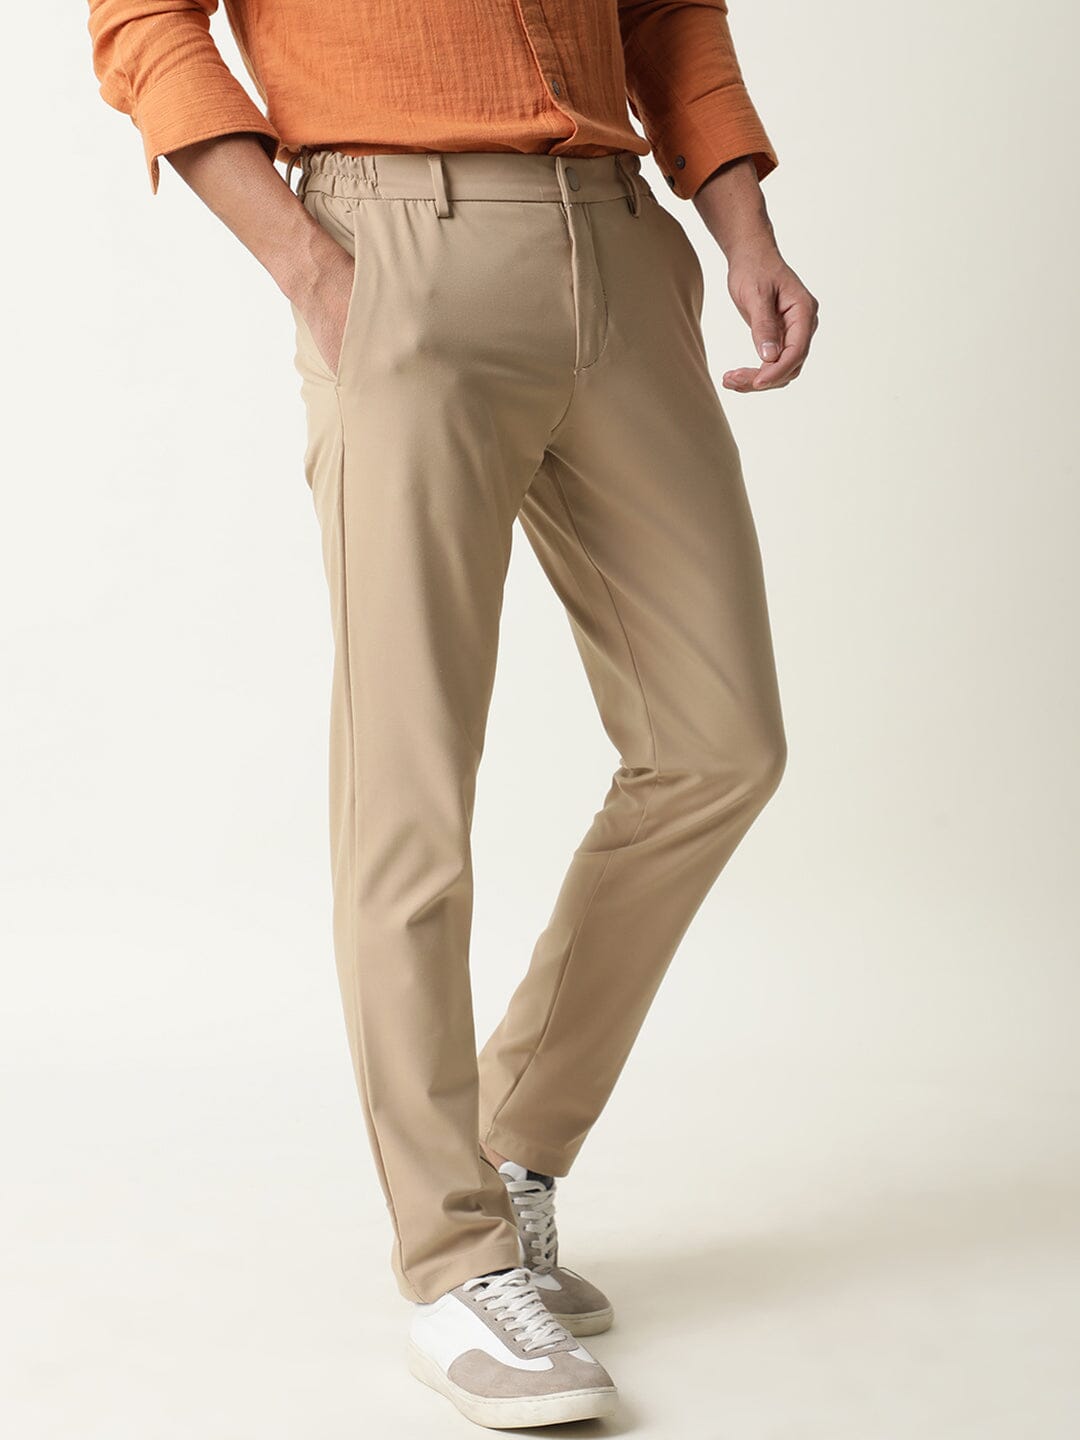 Buy Helzkor Men's Travel Pants Soft Stretchy Durable Elastic Convertible  Trousers with Multiple Pockets(Khaki,M) at Amazon.in